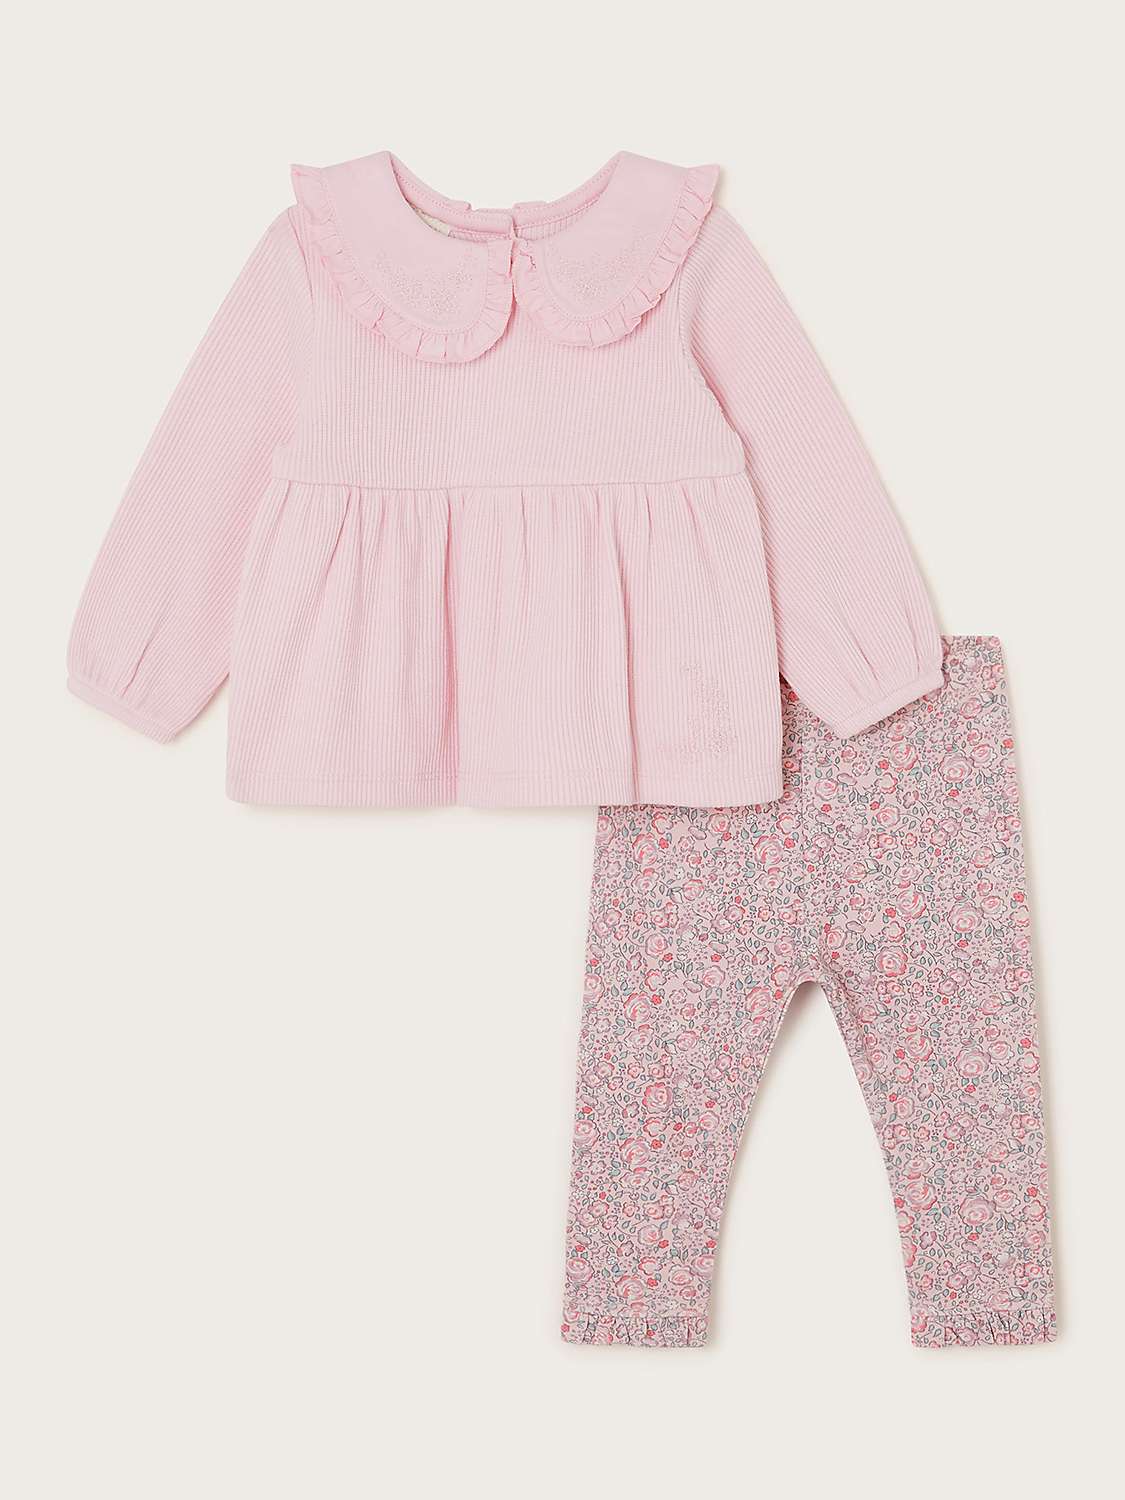 Buy Monsoon Baby Embriodered Rib Top & Floral Ditsy Print Leggings Set, Lilac Online at johnlewis.com